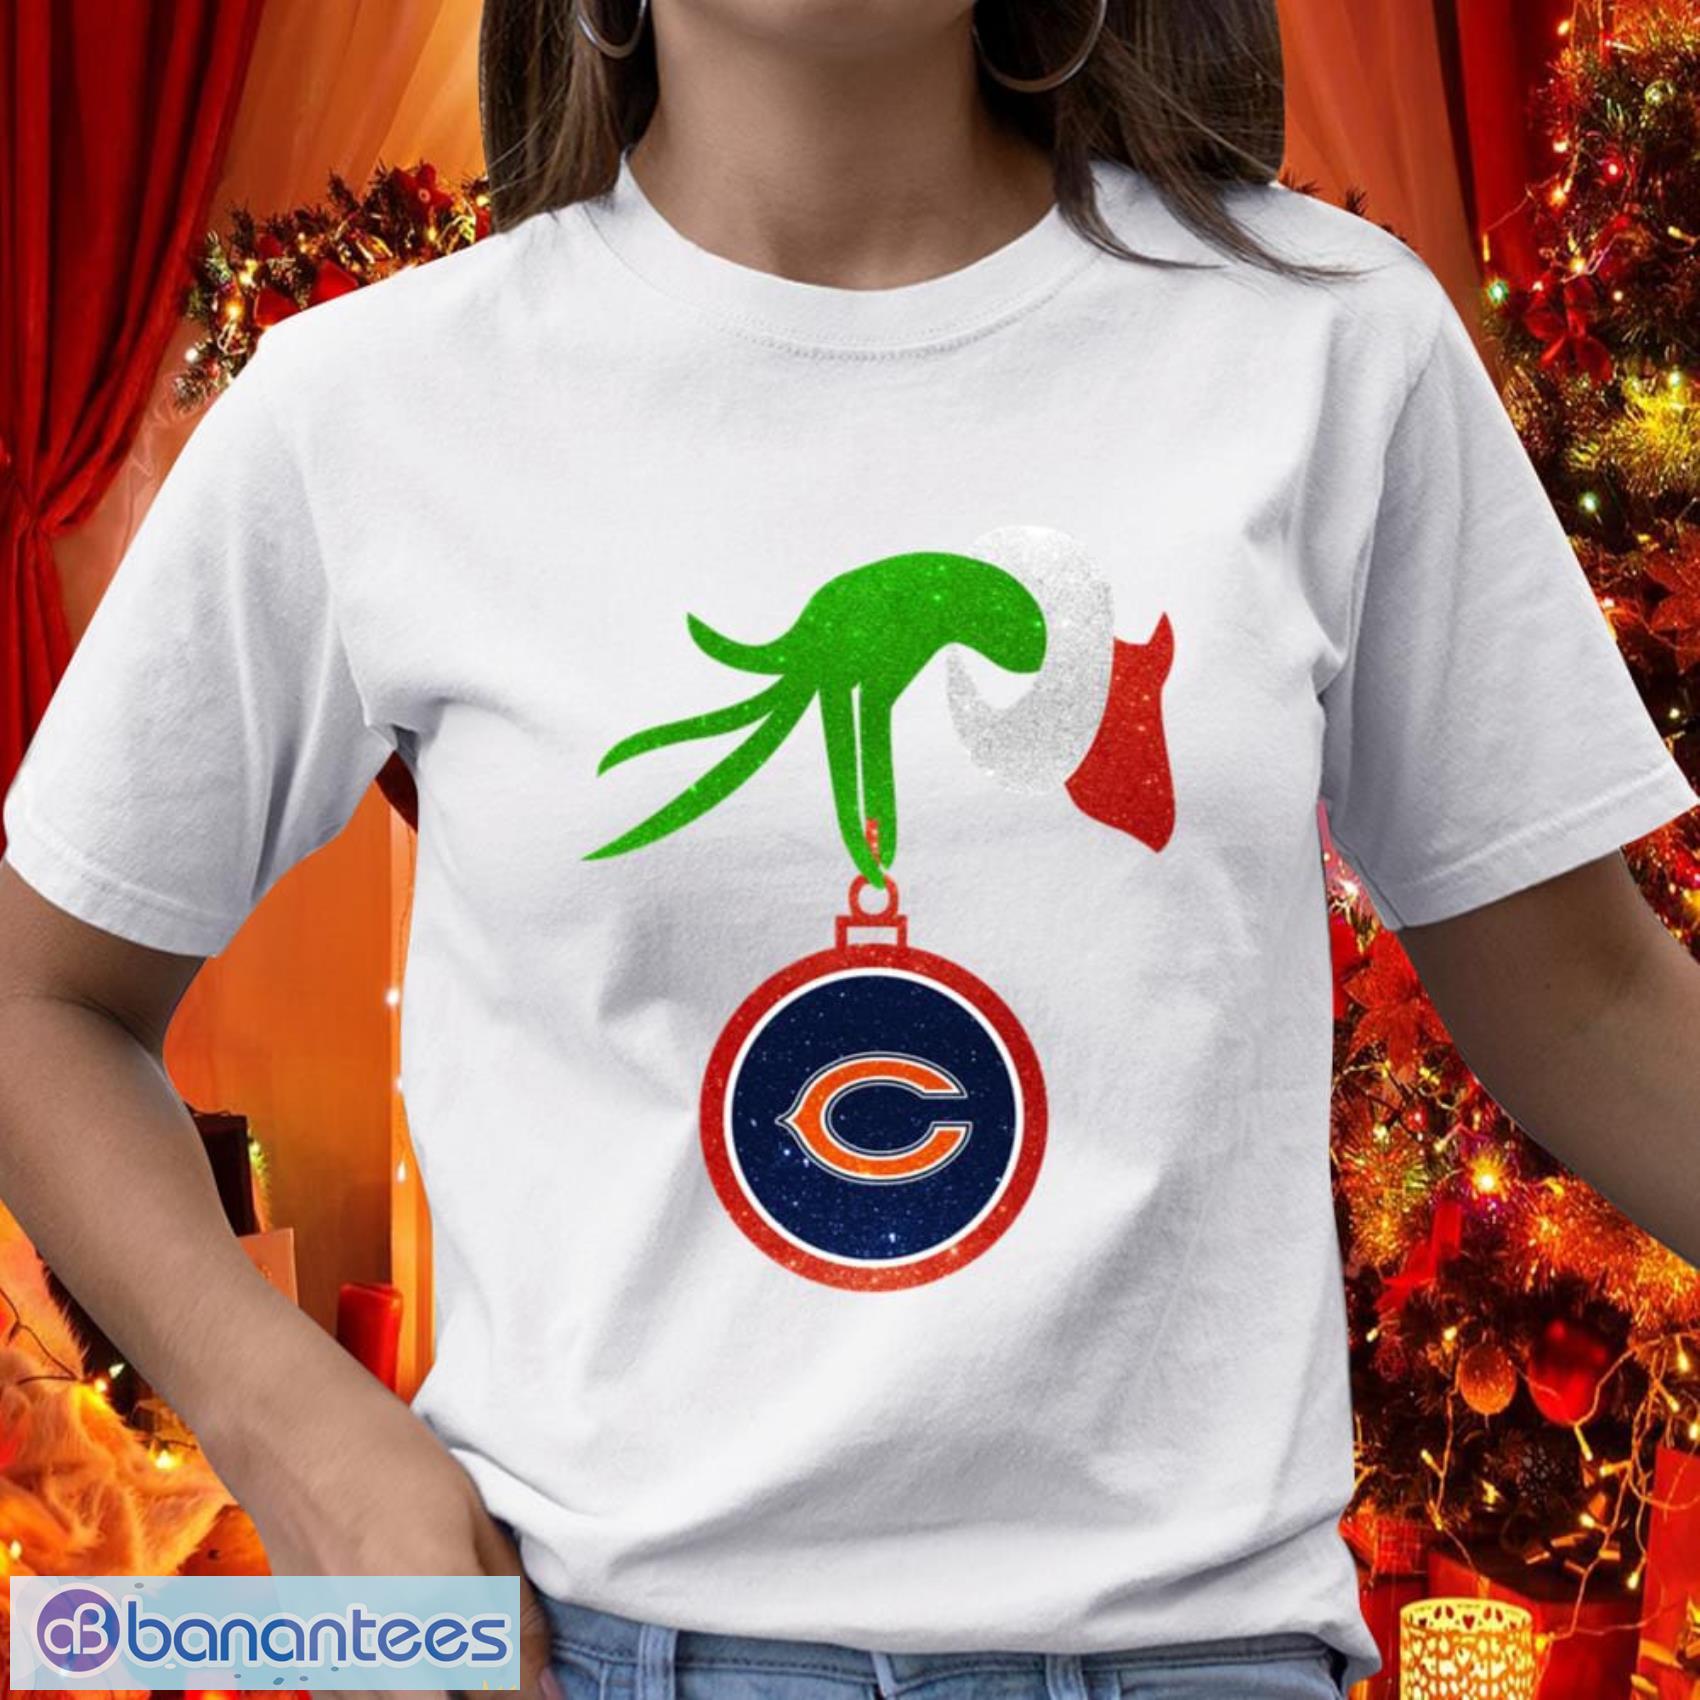 Chicago Bears Grinch Merry Christmas NFL Football Gift Fr Fans T Shirt - Chicago Bears Grinch Merry Christmas NFL Football T Shirt_1